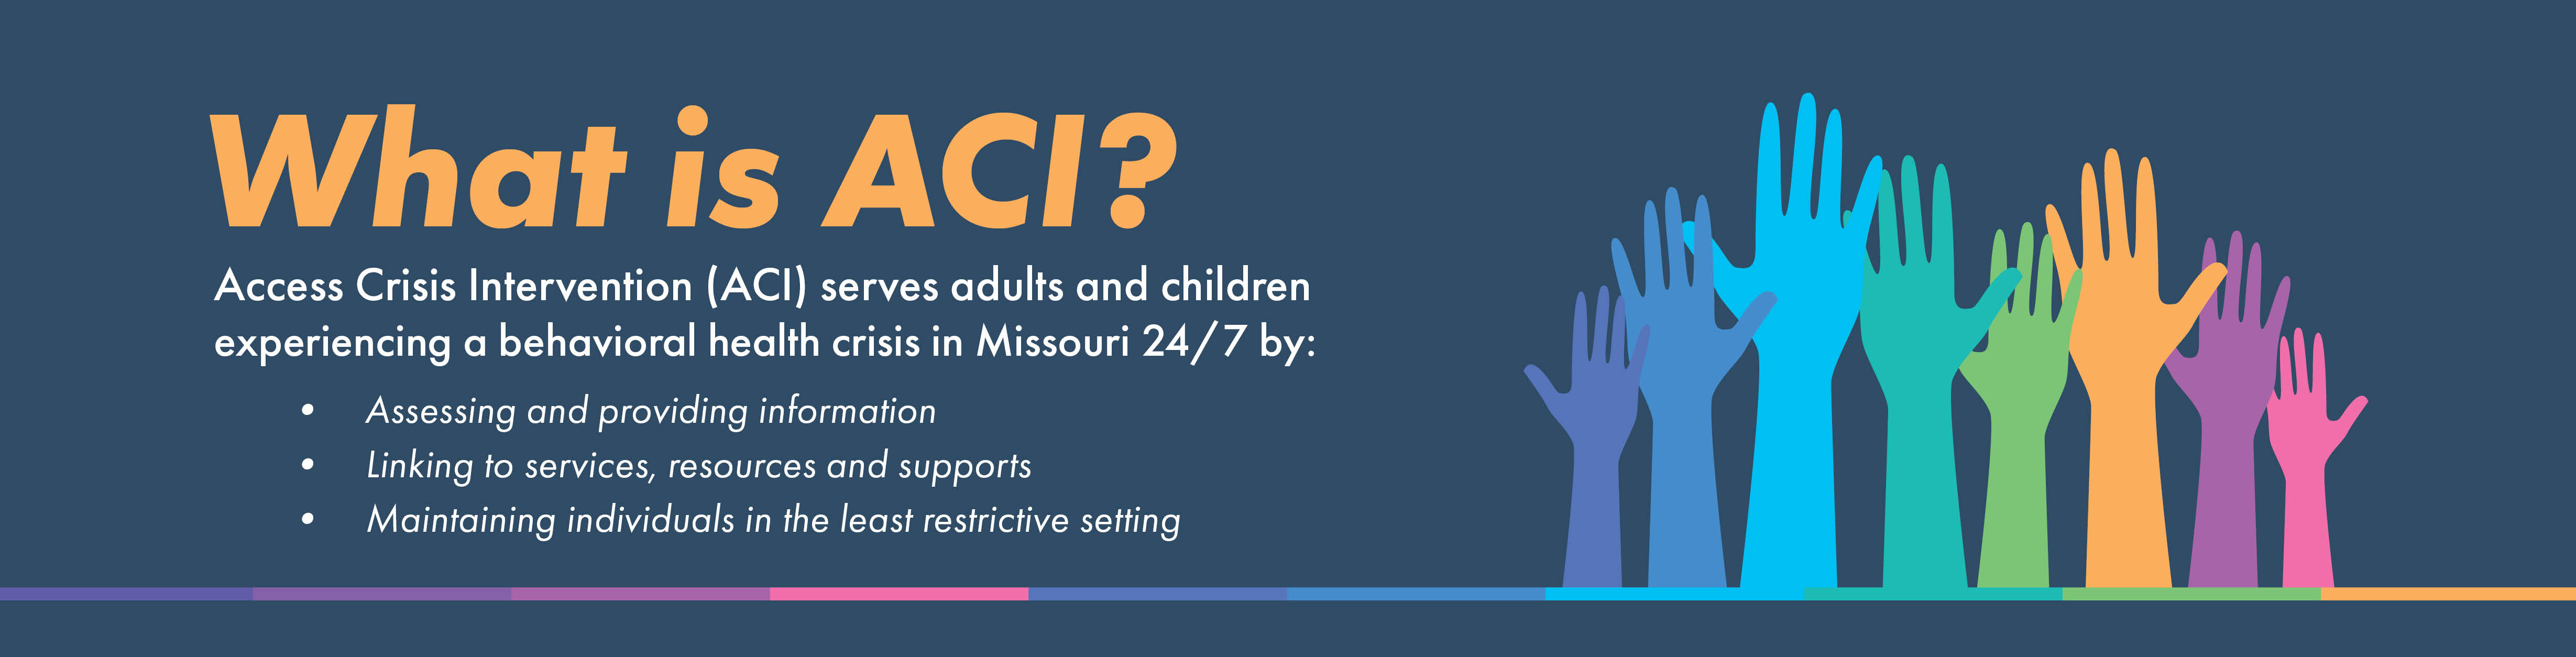 What is ACI?  Access Crisis Intervention (ACI) serves adults and children experiencing a behavioral health crisis in Missouri 24/7 by: Assessing and providing information; Linking to services, resources and supports; maintaining individuals in the least restrictive setting.